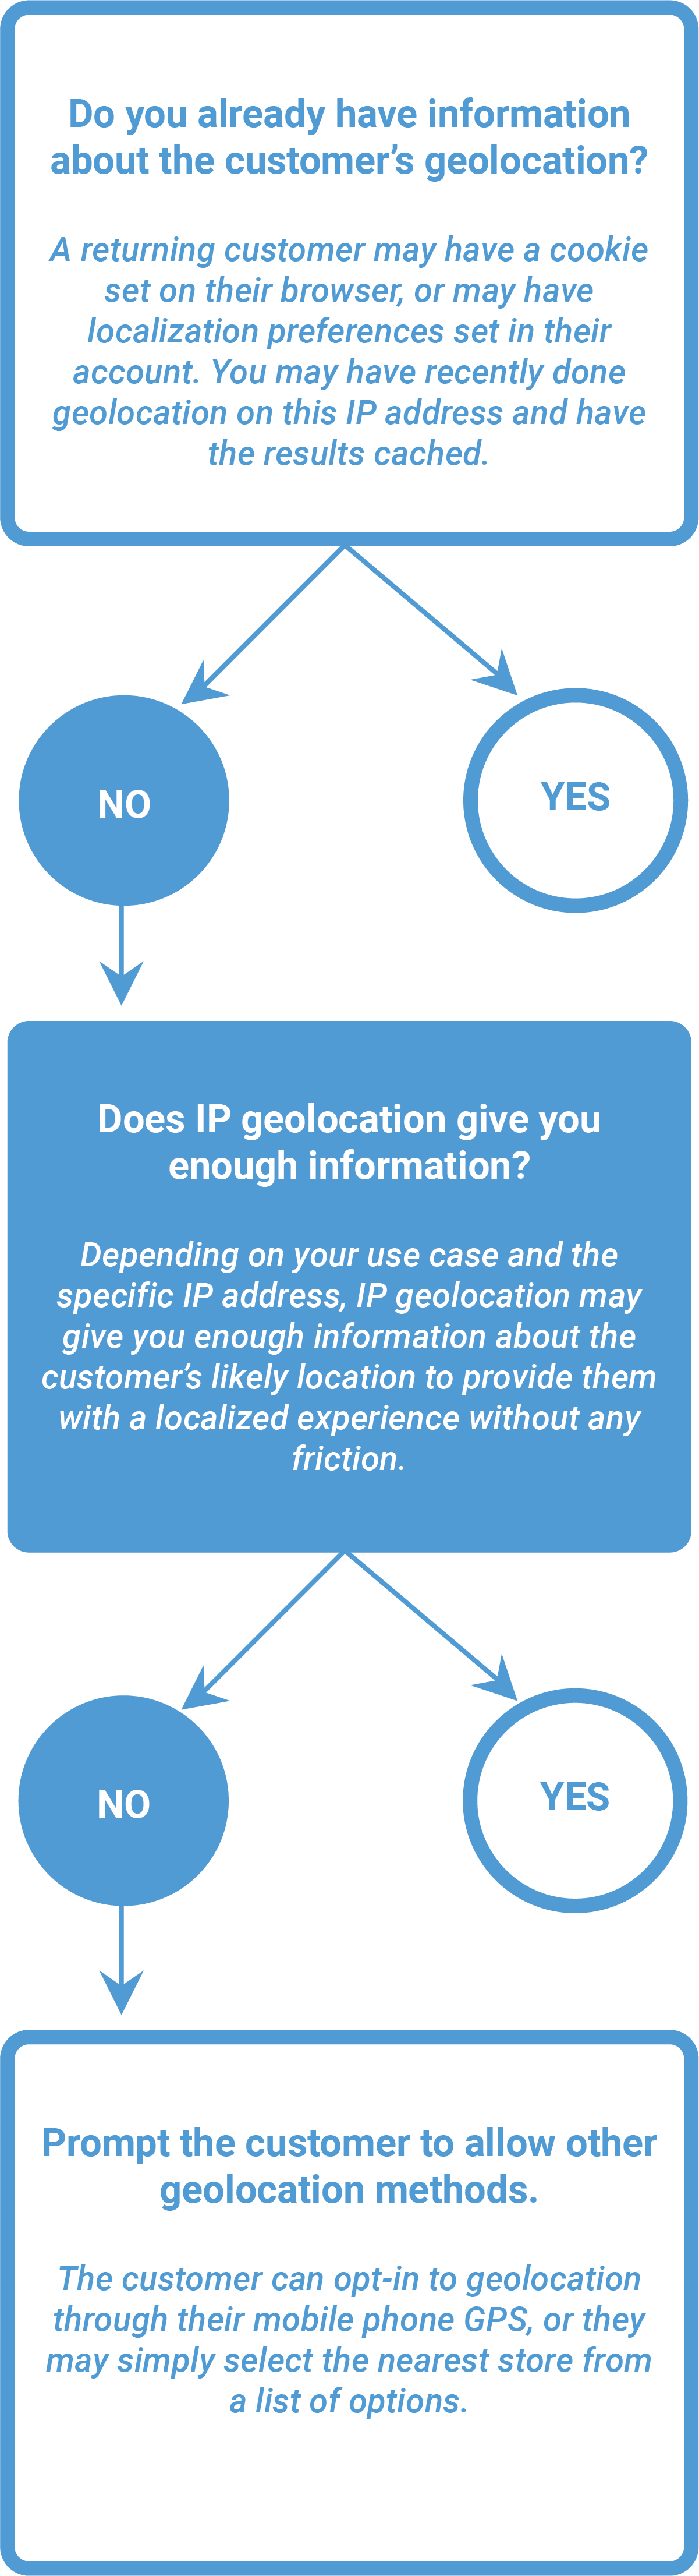 A flow chart, which reads &ldquo;Do you have information about the customer&rsquo;sgeolocation? A returning customer may have a cookie set on their browser, or mayhave localization preferences set in their account. You may have recently donegeolocation on this IP address and have the results cached.&rdquo; This branches to&ldquo;Yes,&rdquo; which terminates, or &ldquo;No,&rdquo; which proceeds to the next box in the flowchart. This box reads, &ldquo;Does IP geolocation give you enough information?Depending on your use case and the specific IP address, IP geolocation may giveyou enough information about the customer&rsquo;s likely location to provide them witha localized experience without any friction.&rdquo; This branches to &ldquo;Yes,&rdquo; whichterminates, or &ldquo;No,&rdquo; which proceeds to the next box in the flow chart. This boxreads, &ldquo;Prompt the customer to allow other geolocation methods. The customer canopt-in to geolocation through their mobile phone GPS, or they may simply selectthe nearest store from a list of options.&rdquo;